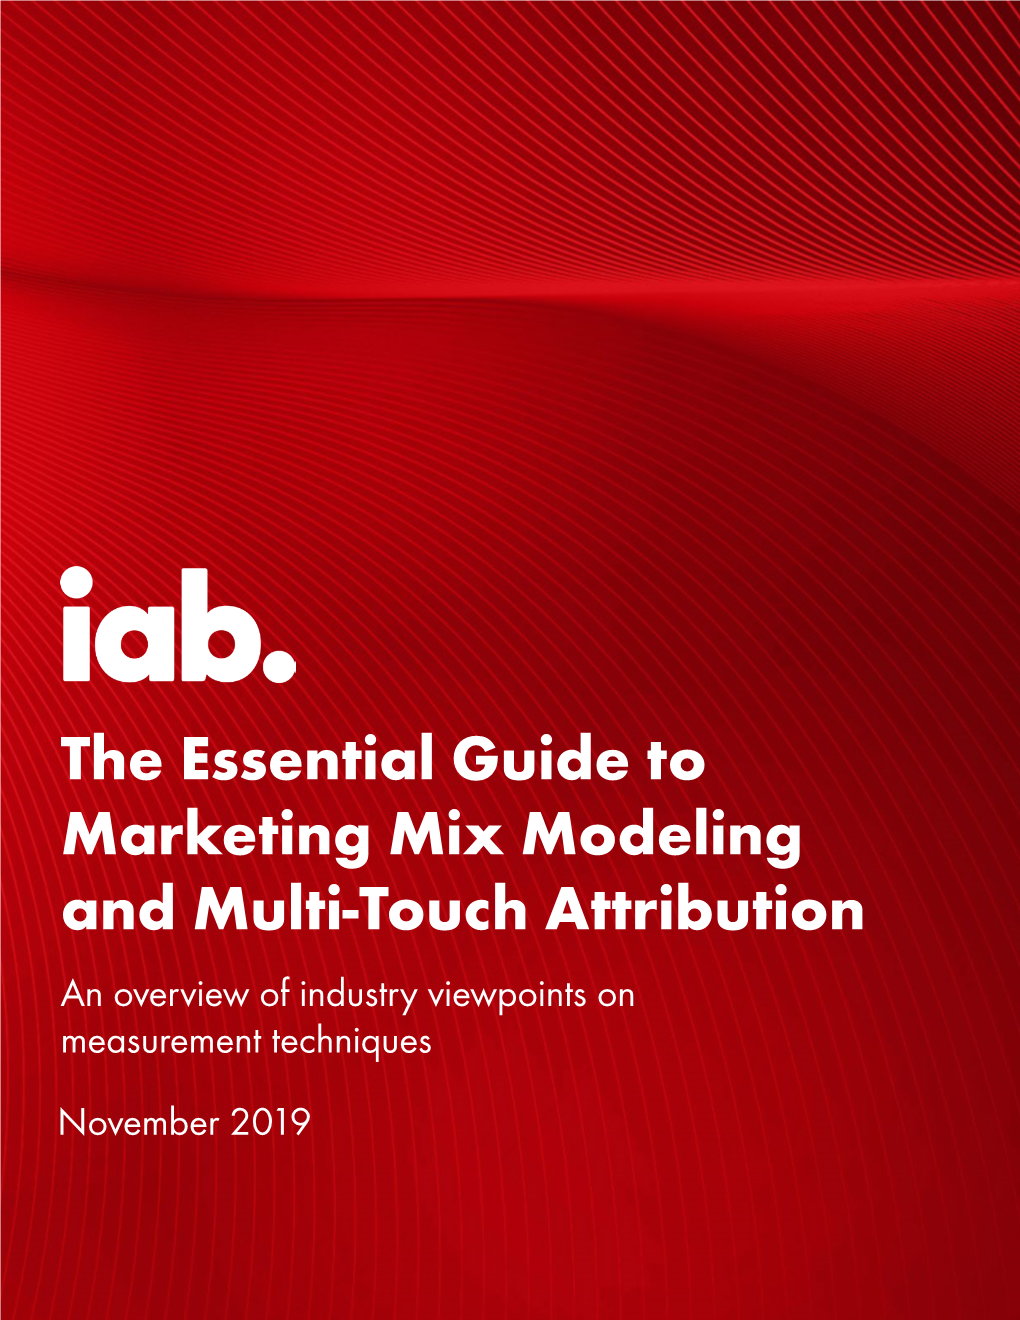 The Essential Guide to Marketing Mix Modeling and Multi-Touch Attribution an Overview of Industry Viewpoints on Measurement Techniques